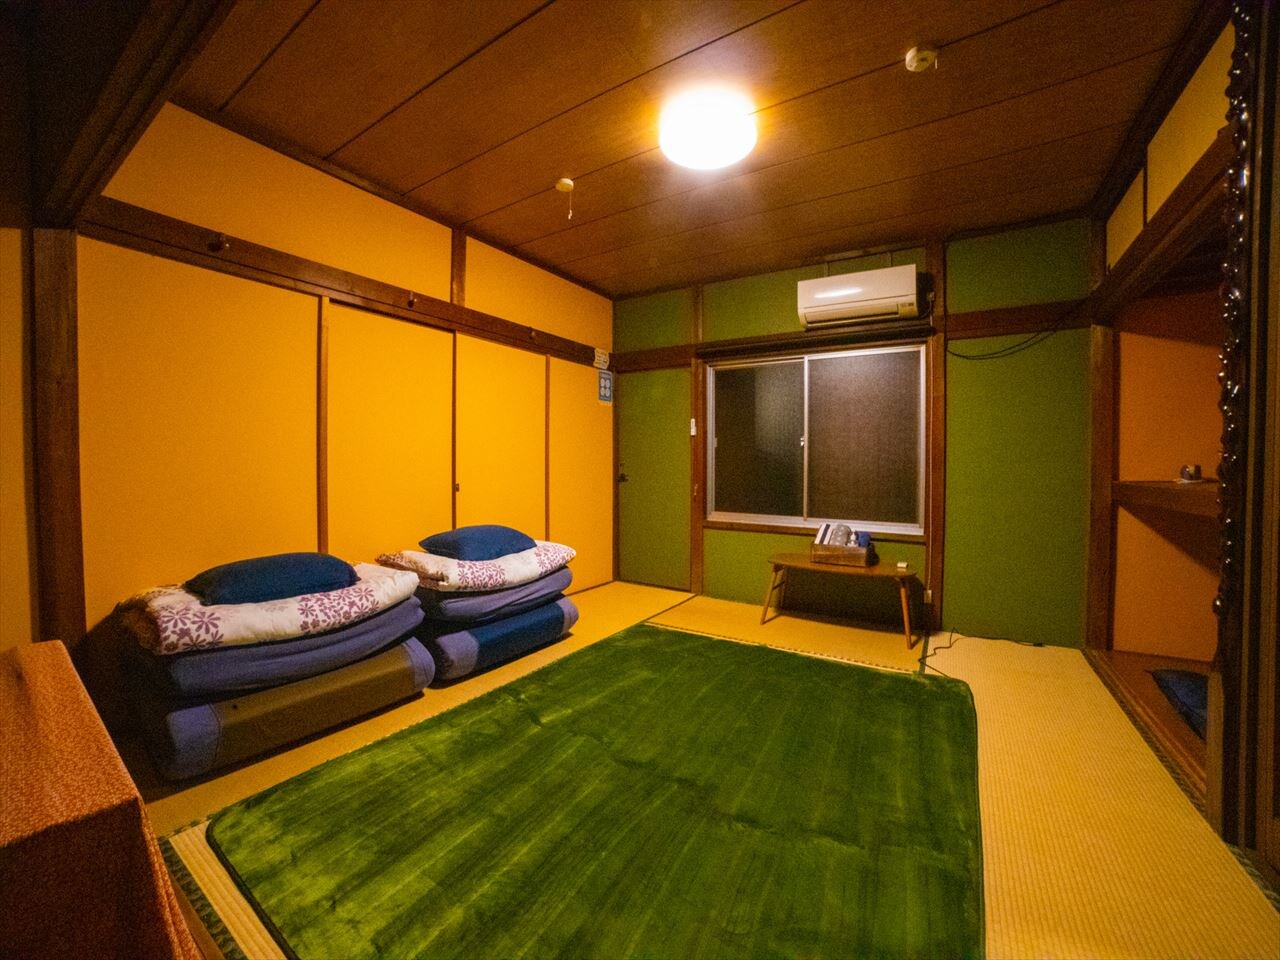 Japanese-style room on the 2nd floor of the annex